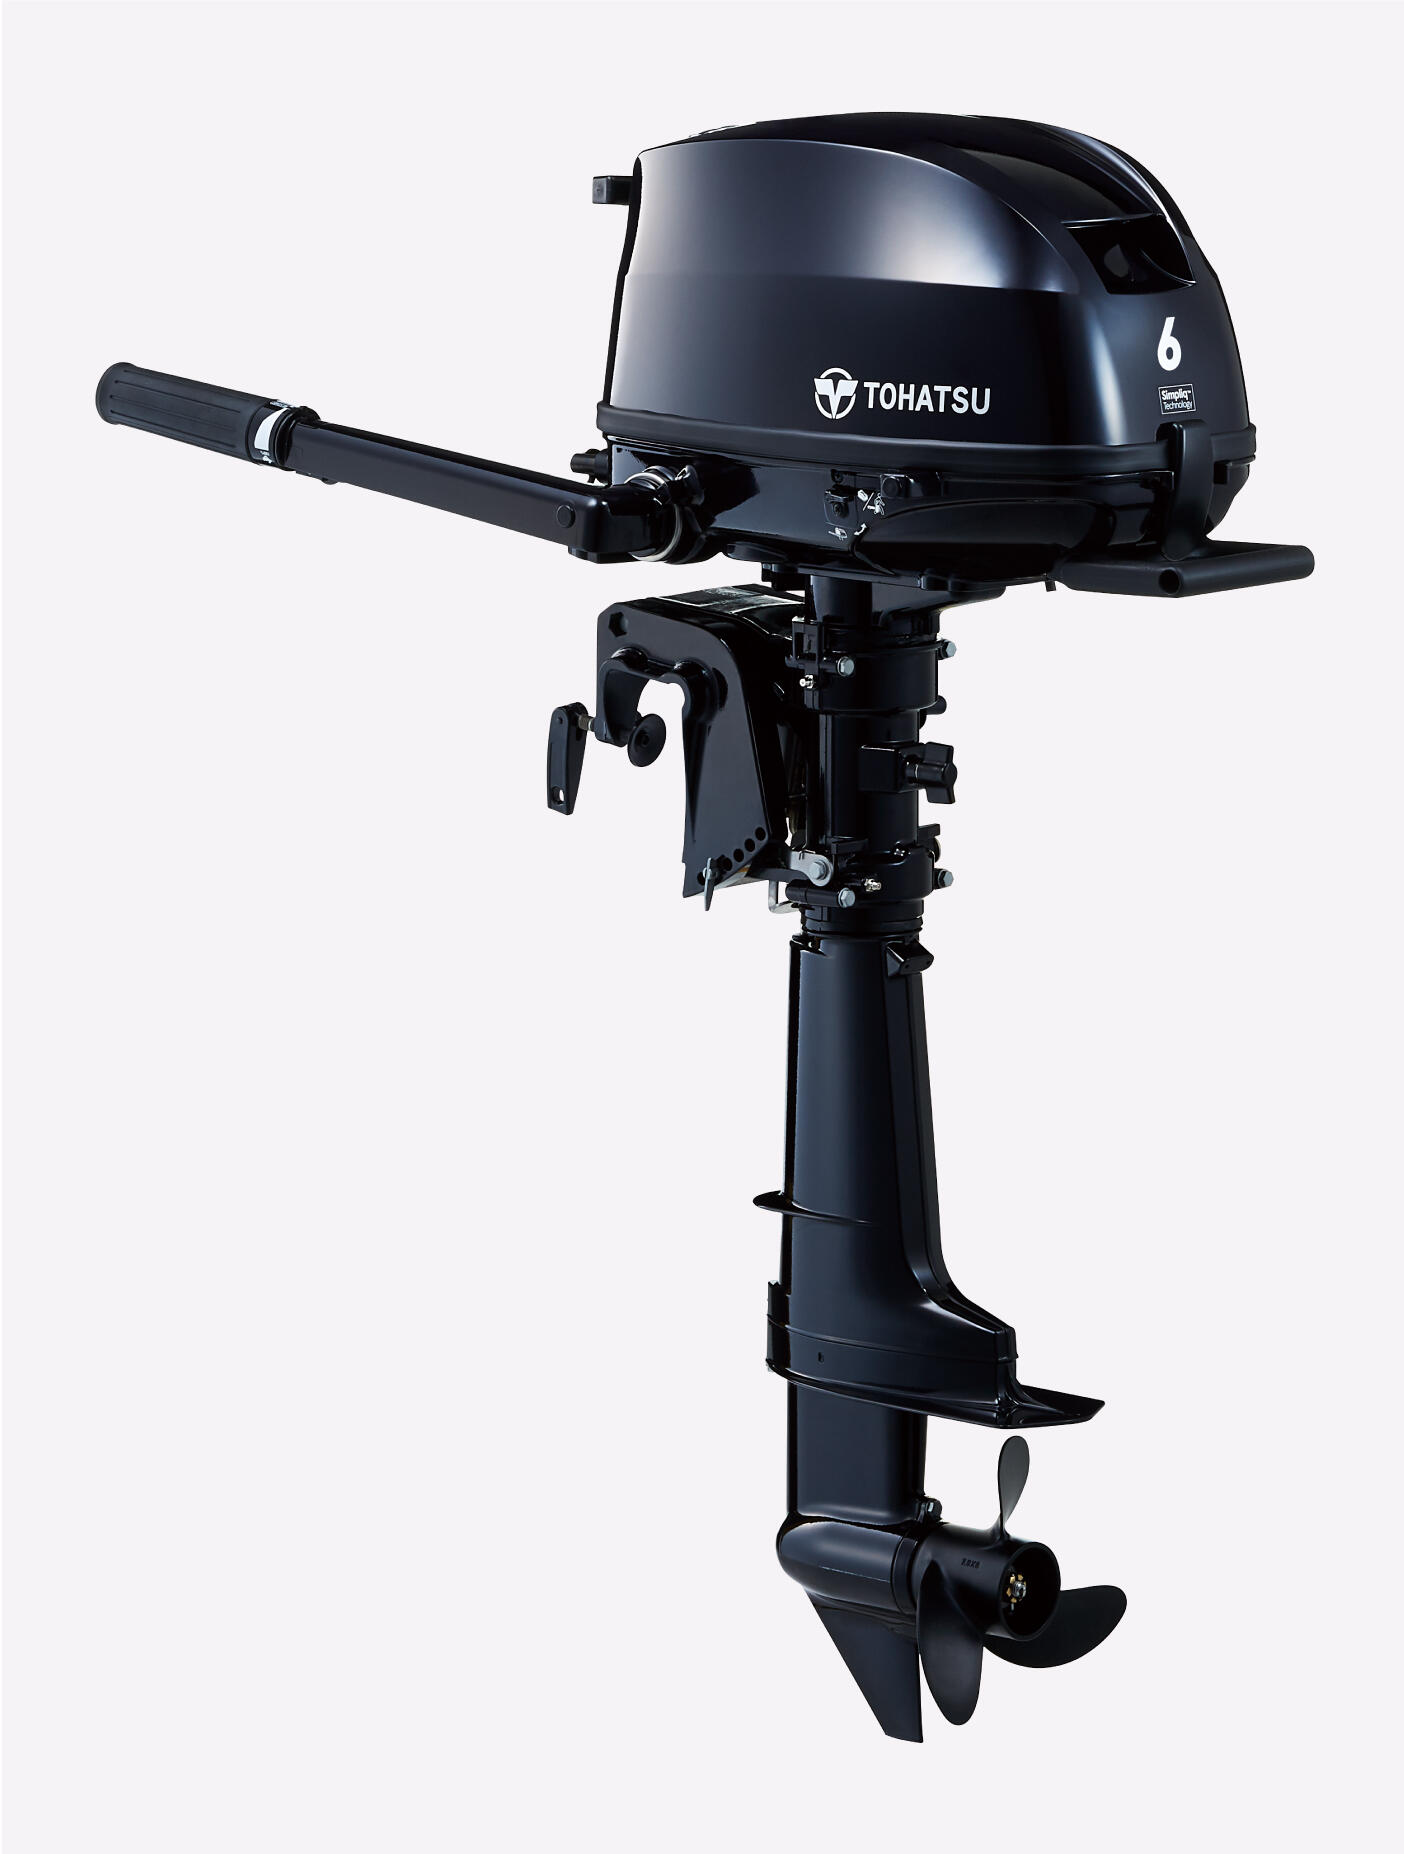 6HP Tohatsu Short Shaft SAIL PRO 4-Stroke Outboard Motor with Internal Fuel Tank 12v Charging